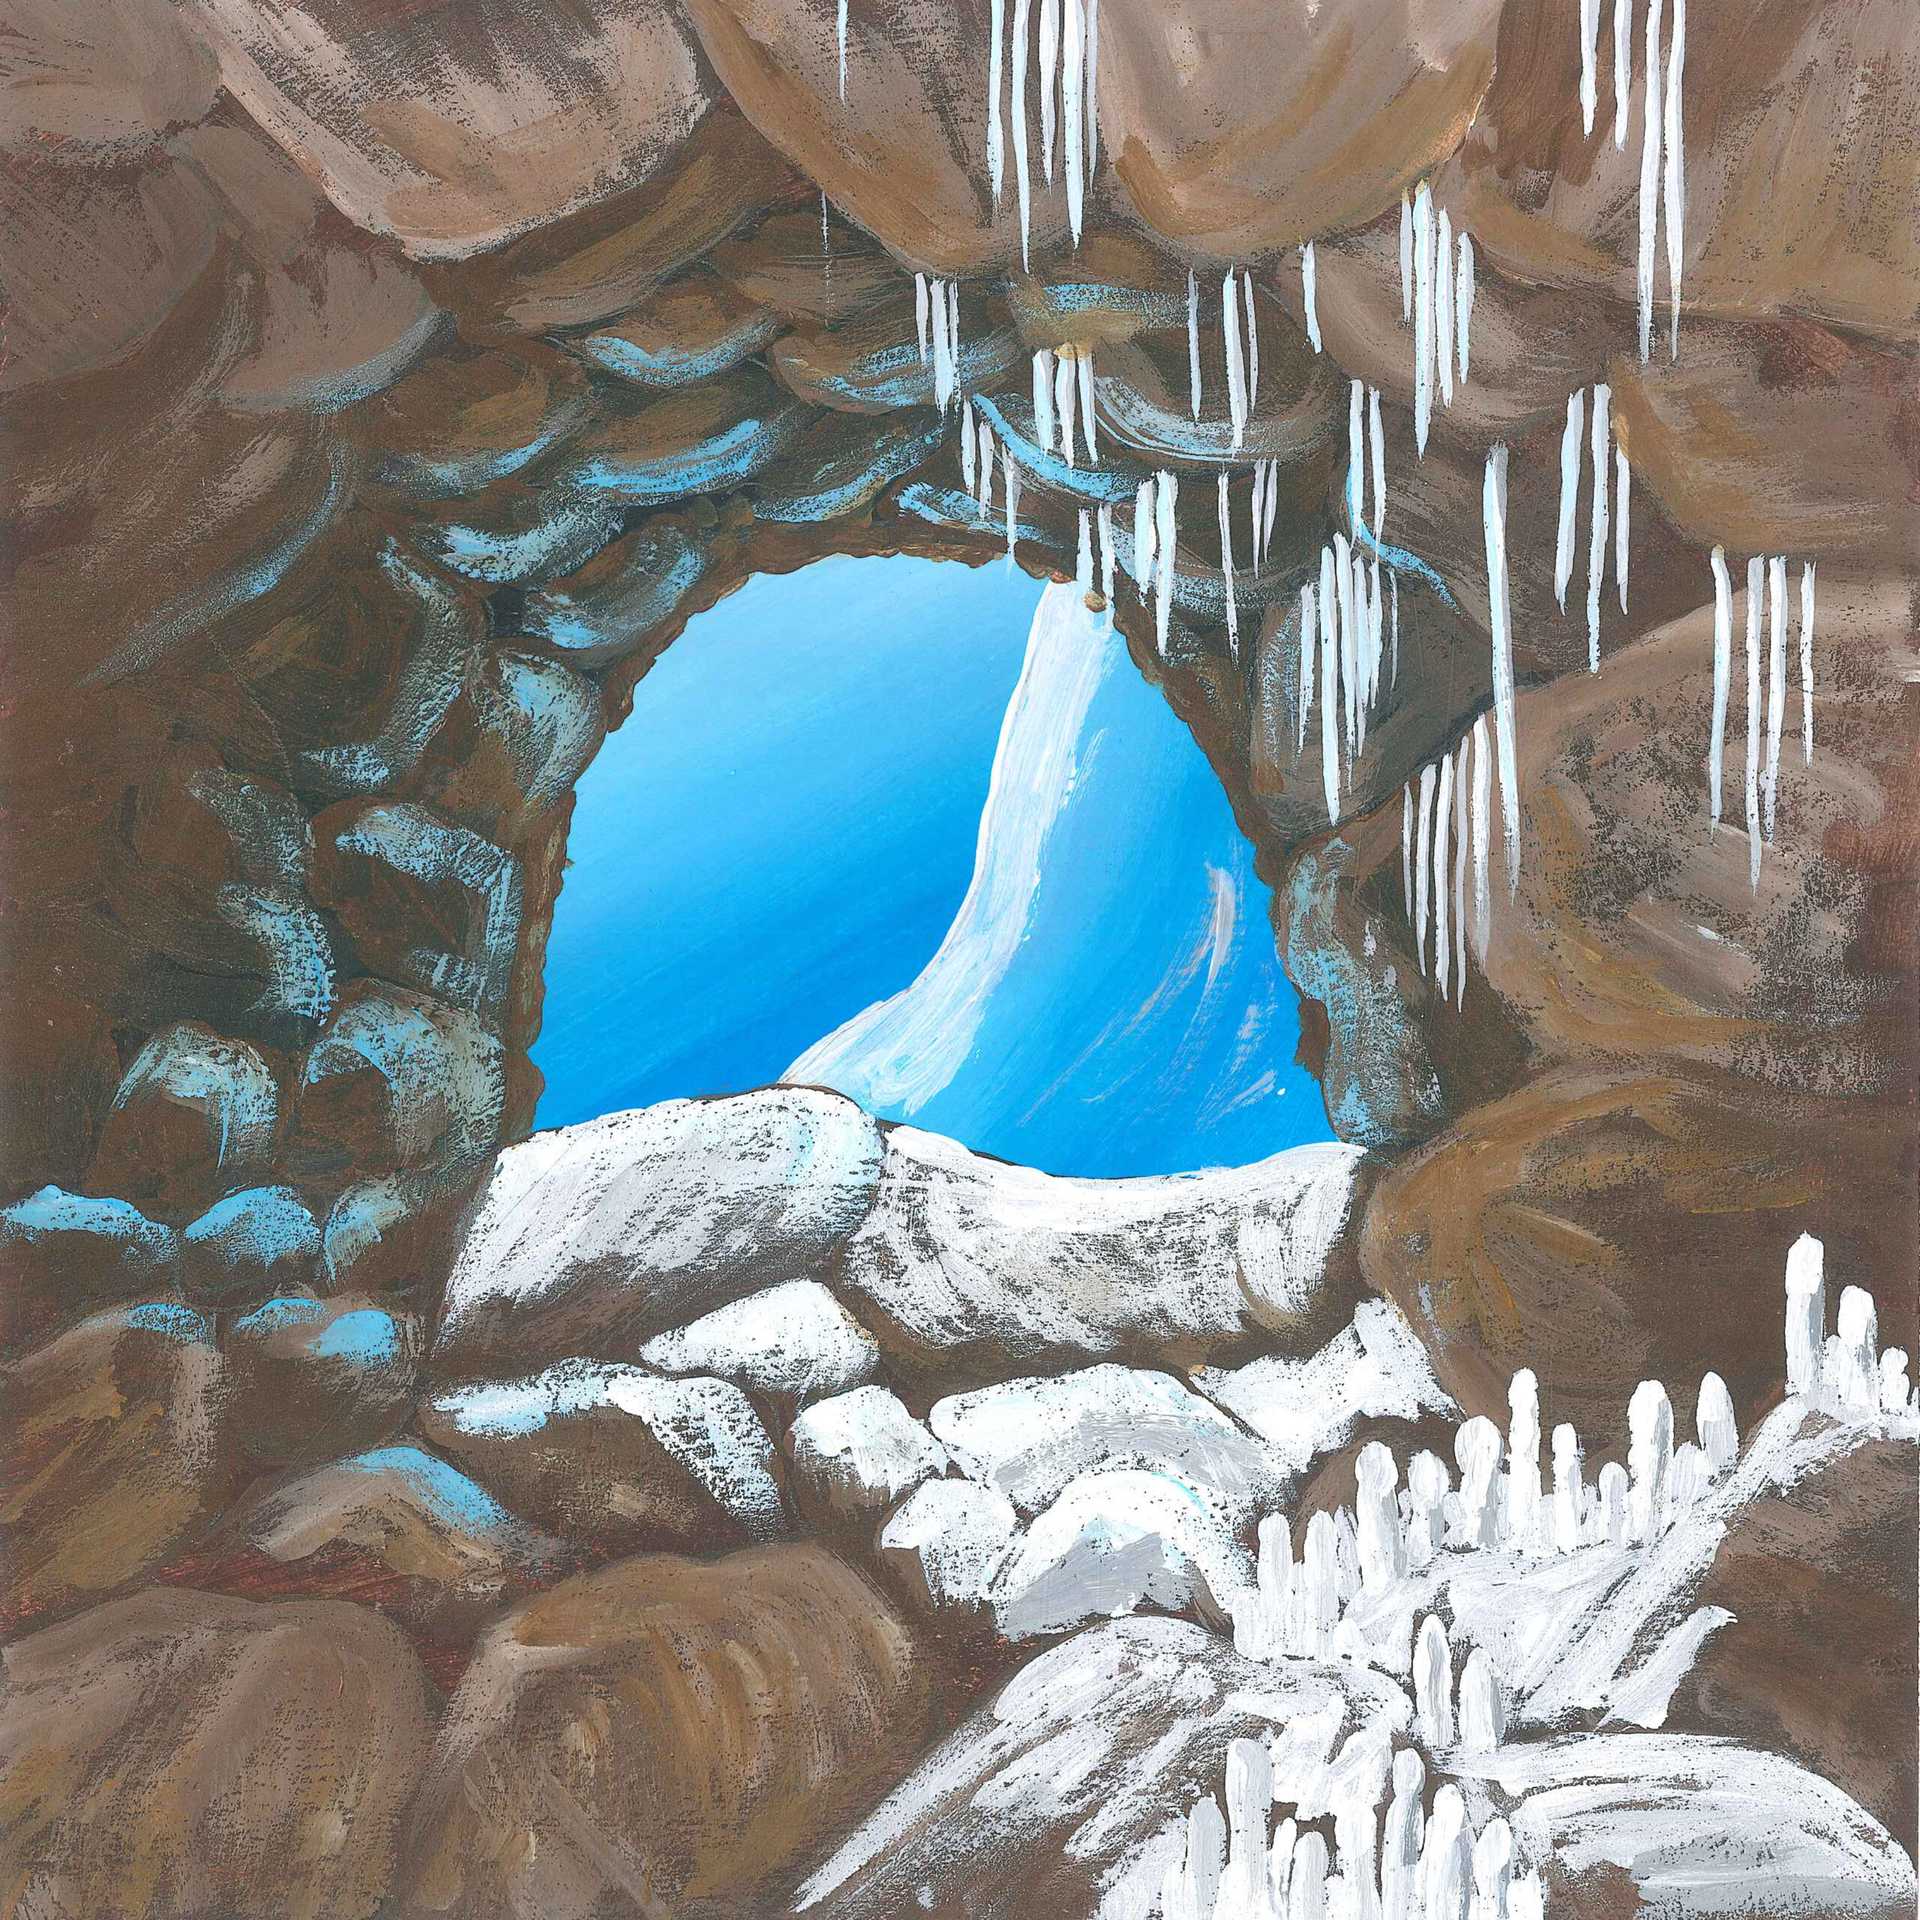 Water Drops in a Lava Cave - nature landscape painting - earth.fm